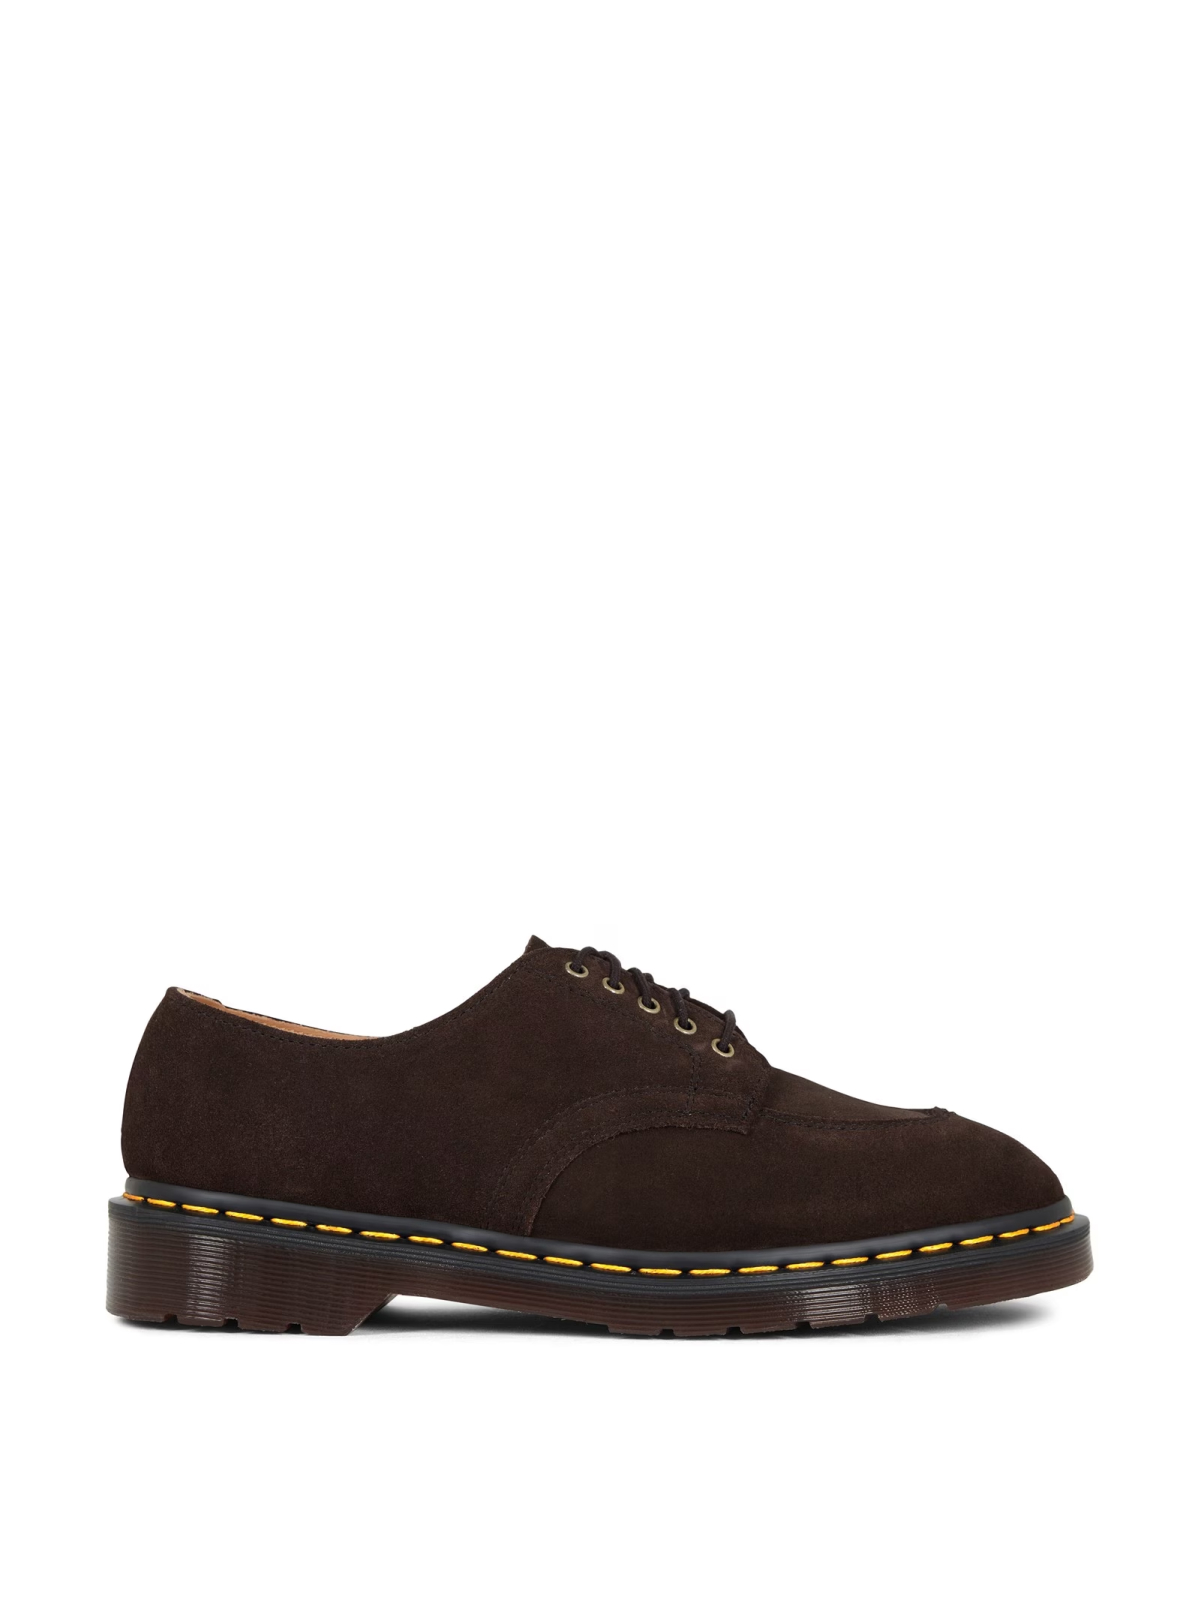 2046 Chocolate Repello Lace-up Derby